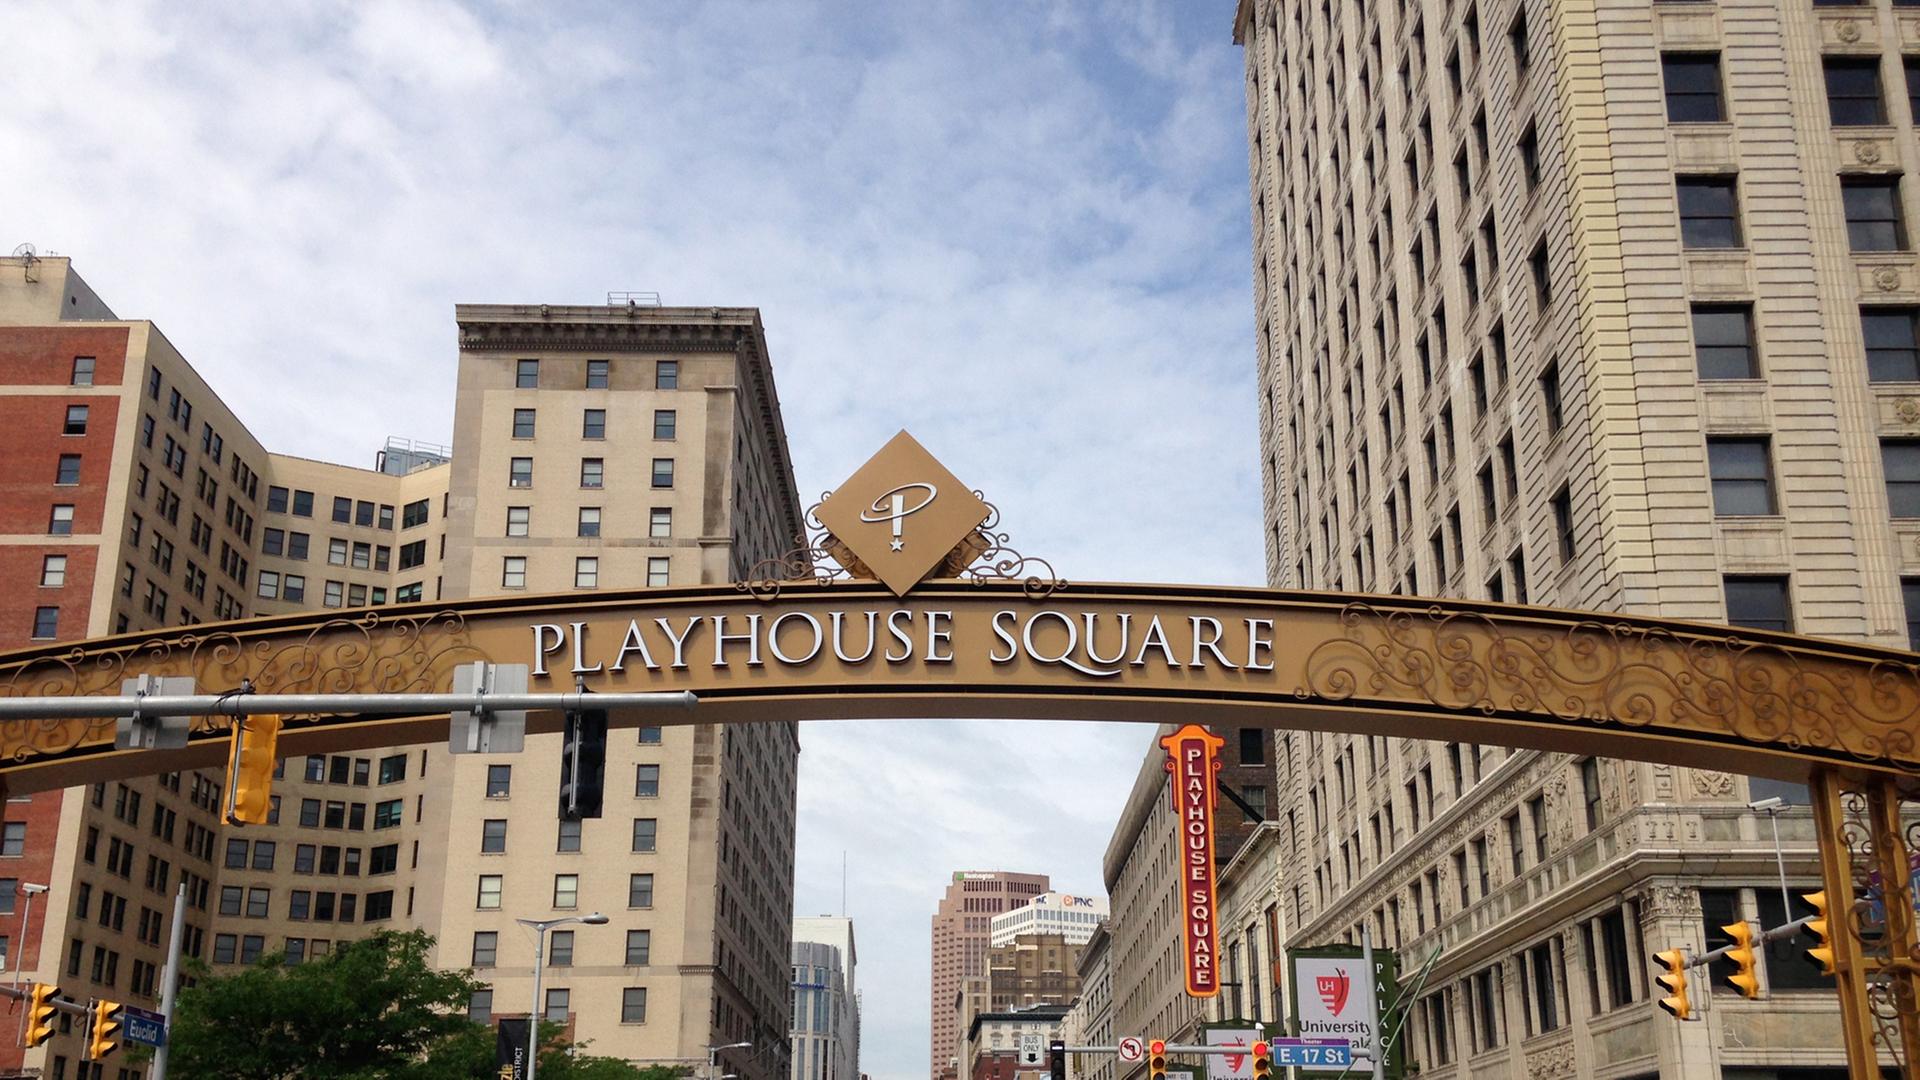 Playhouse Square in Cleveland, Ohio